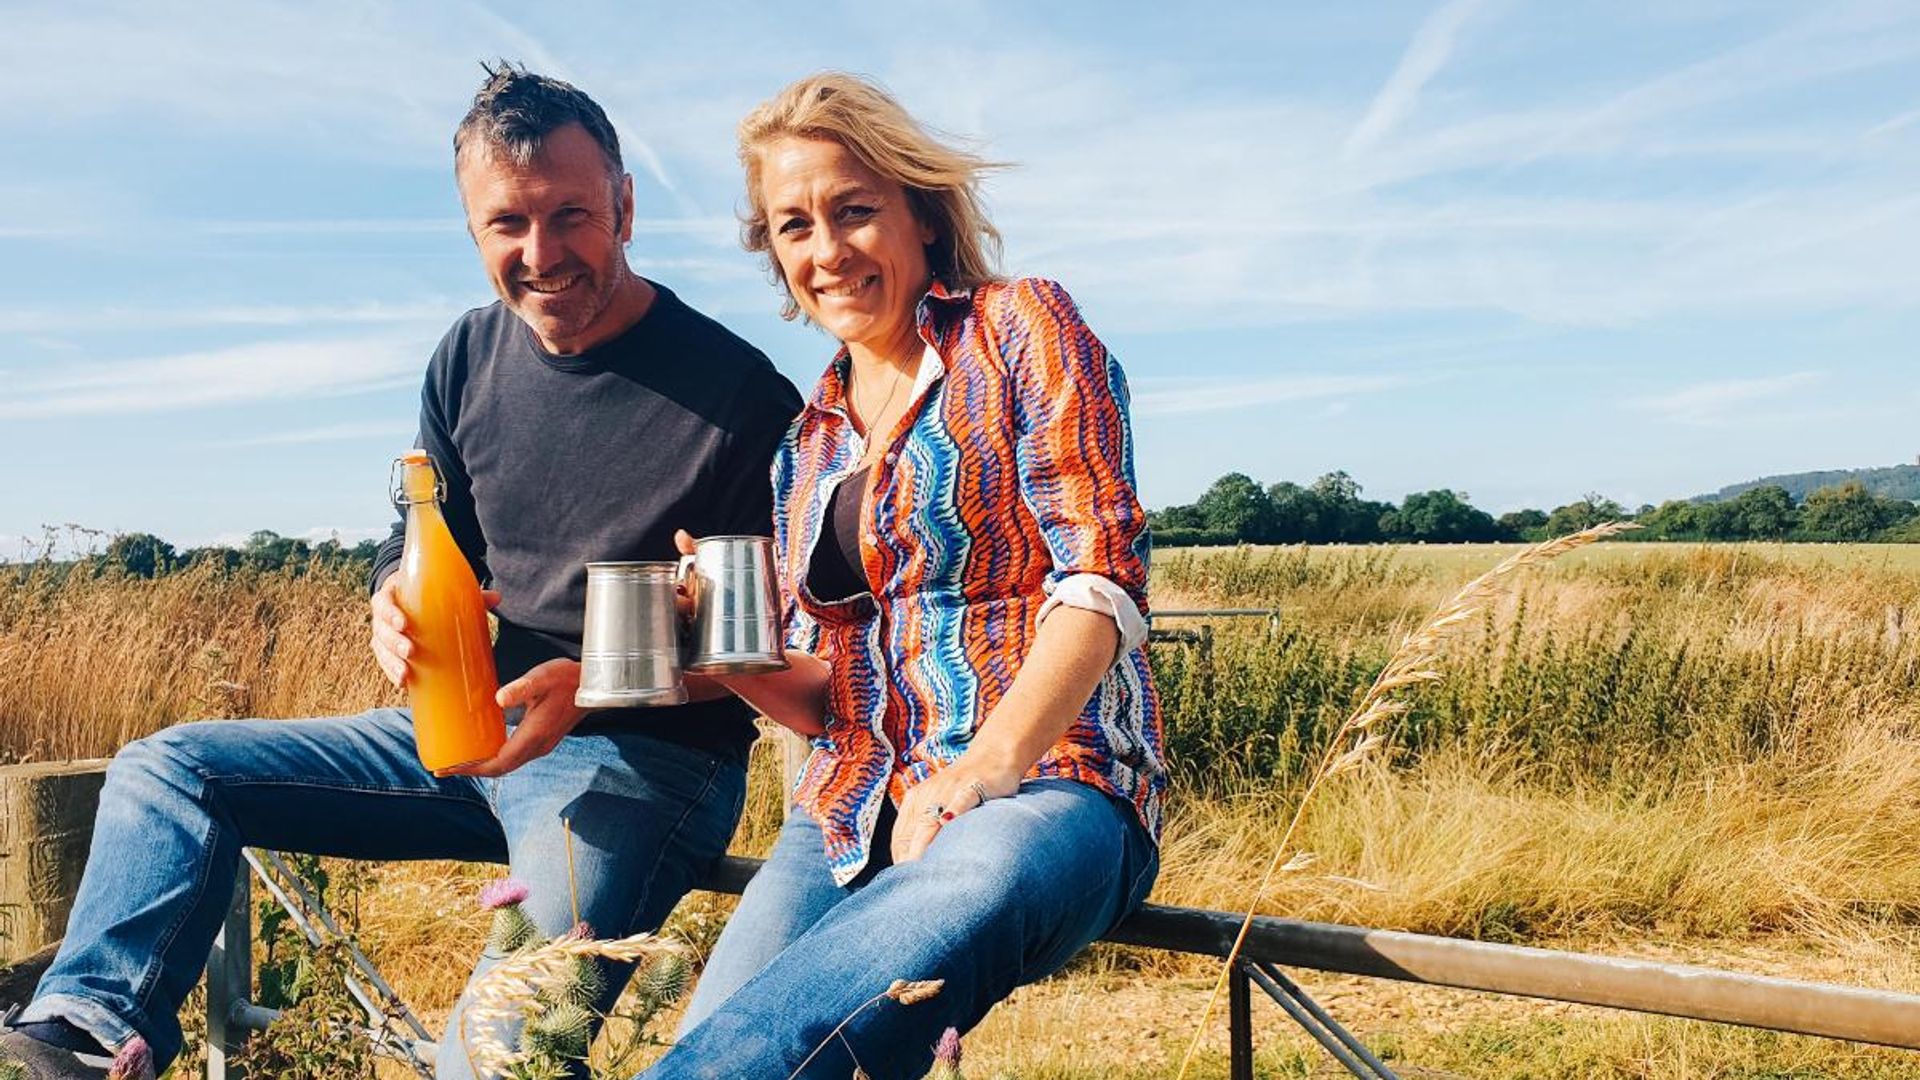 Sarah Beeny S New Life In The Country Hit With Criticism From Locals Hello